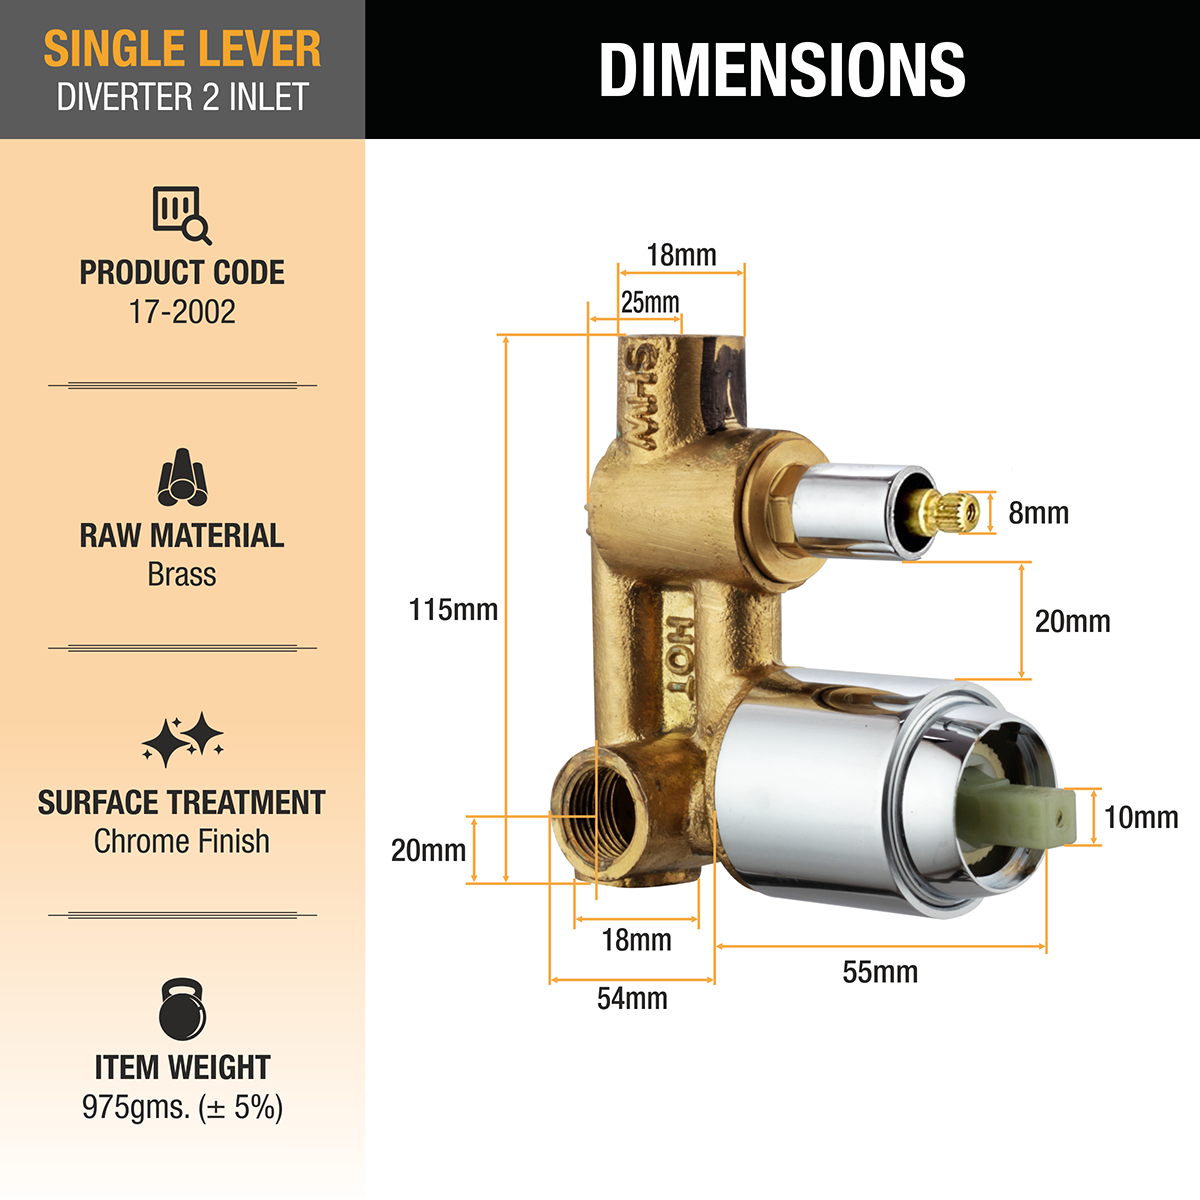 Single Lever 2-inlet Diverter (Body Only) dimensions and size